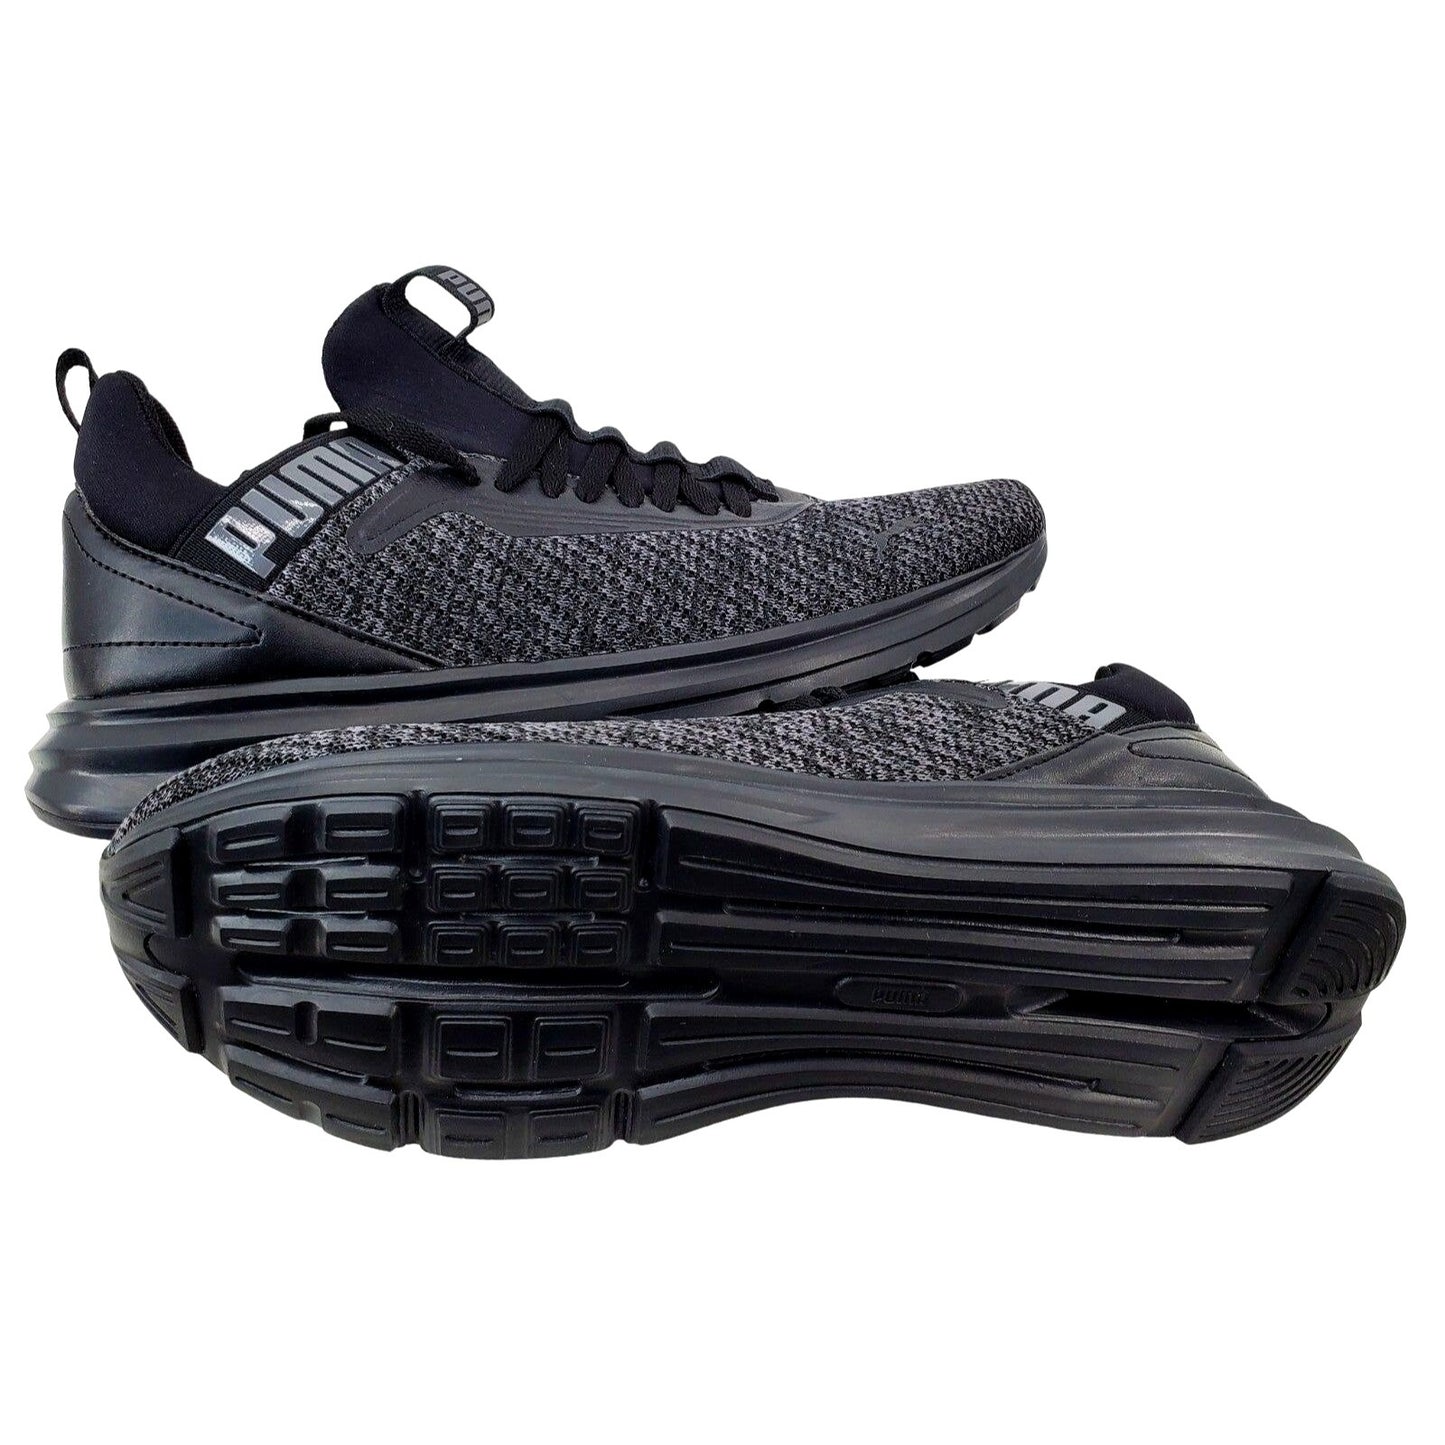 PUMA Sneakers Men's Enzo Beta Woven V3 Running Activewear Slip-on shoes